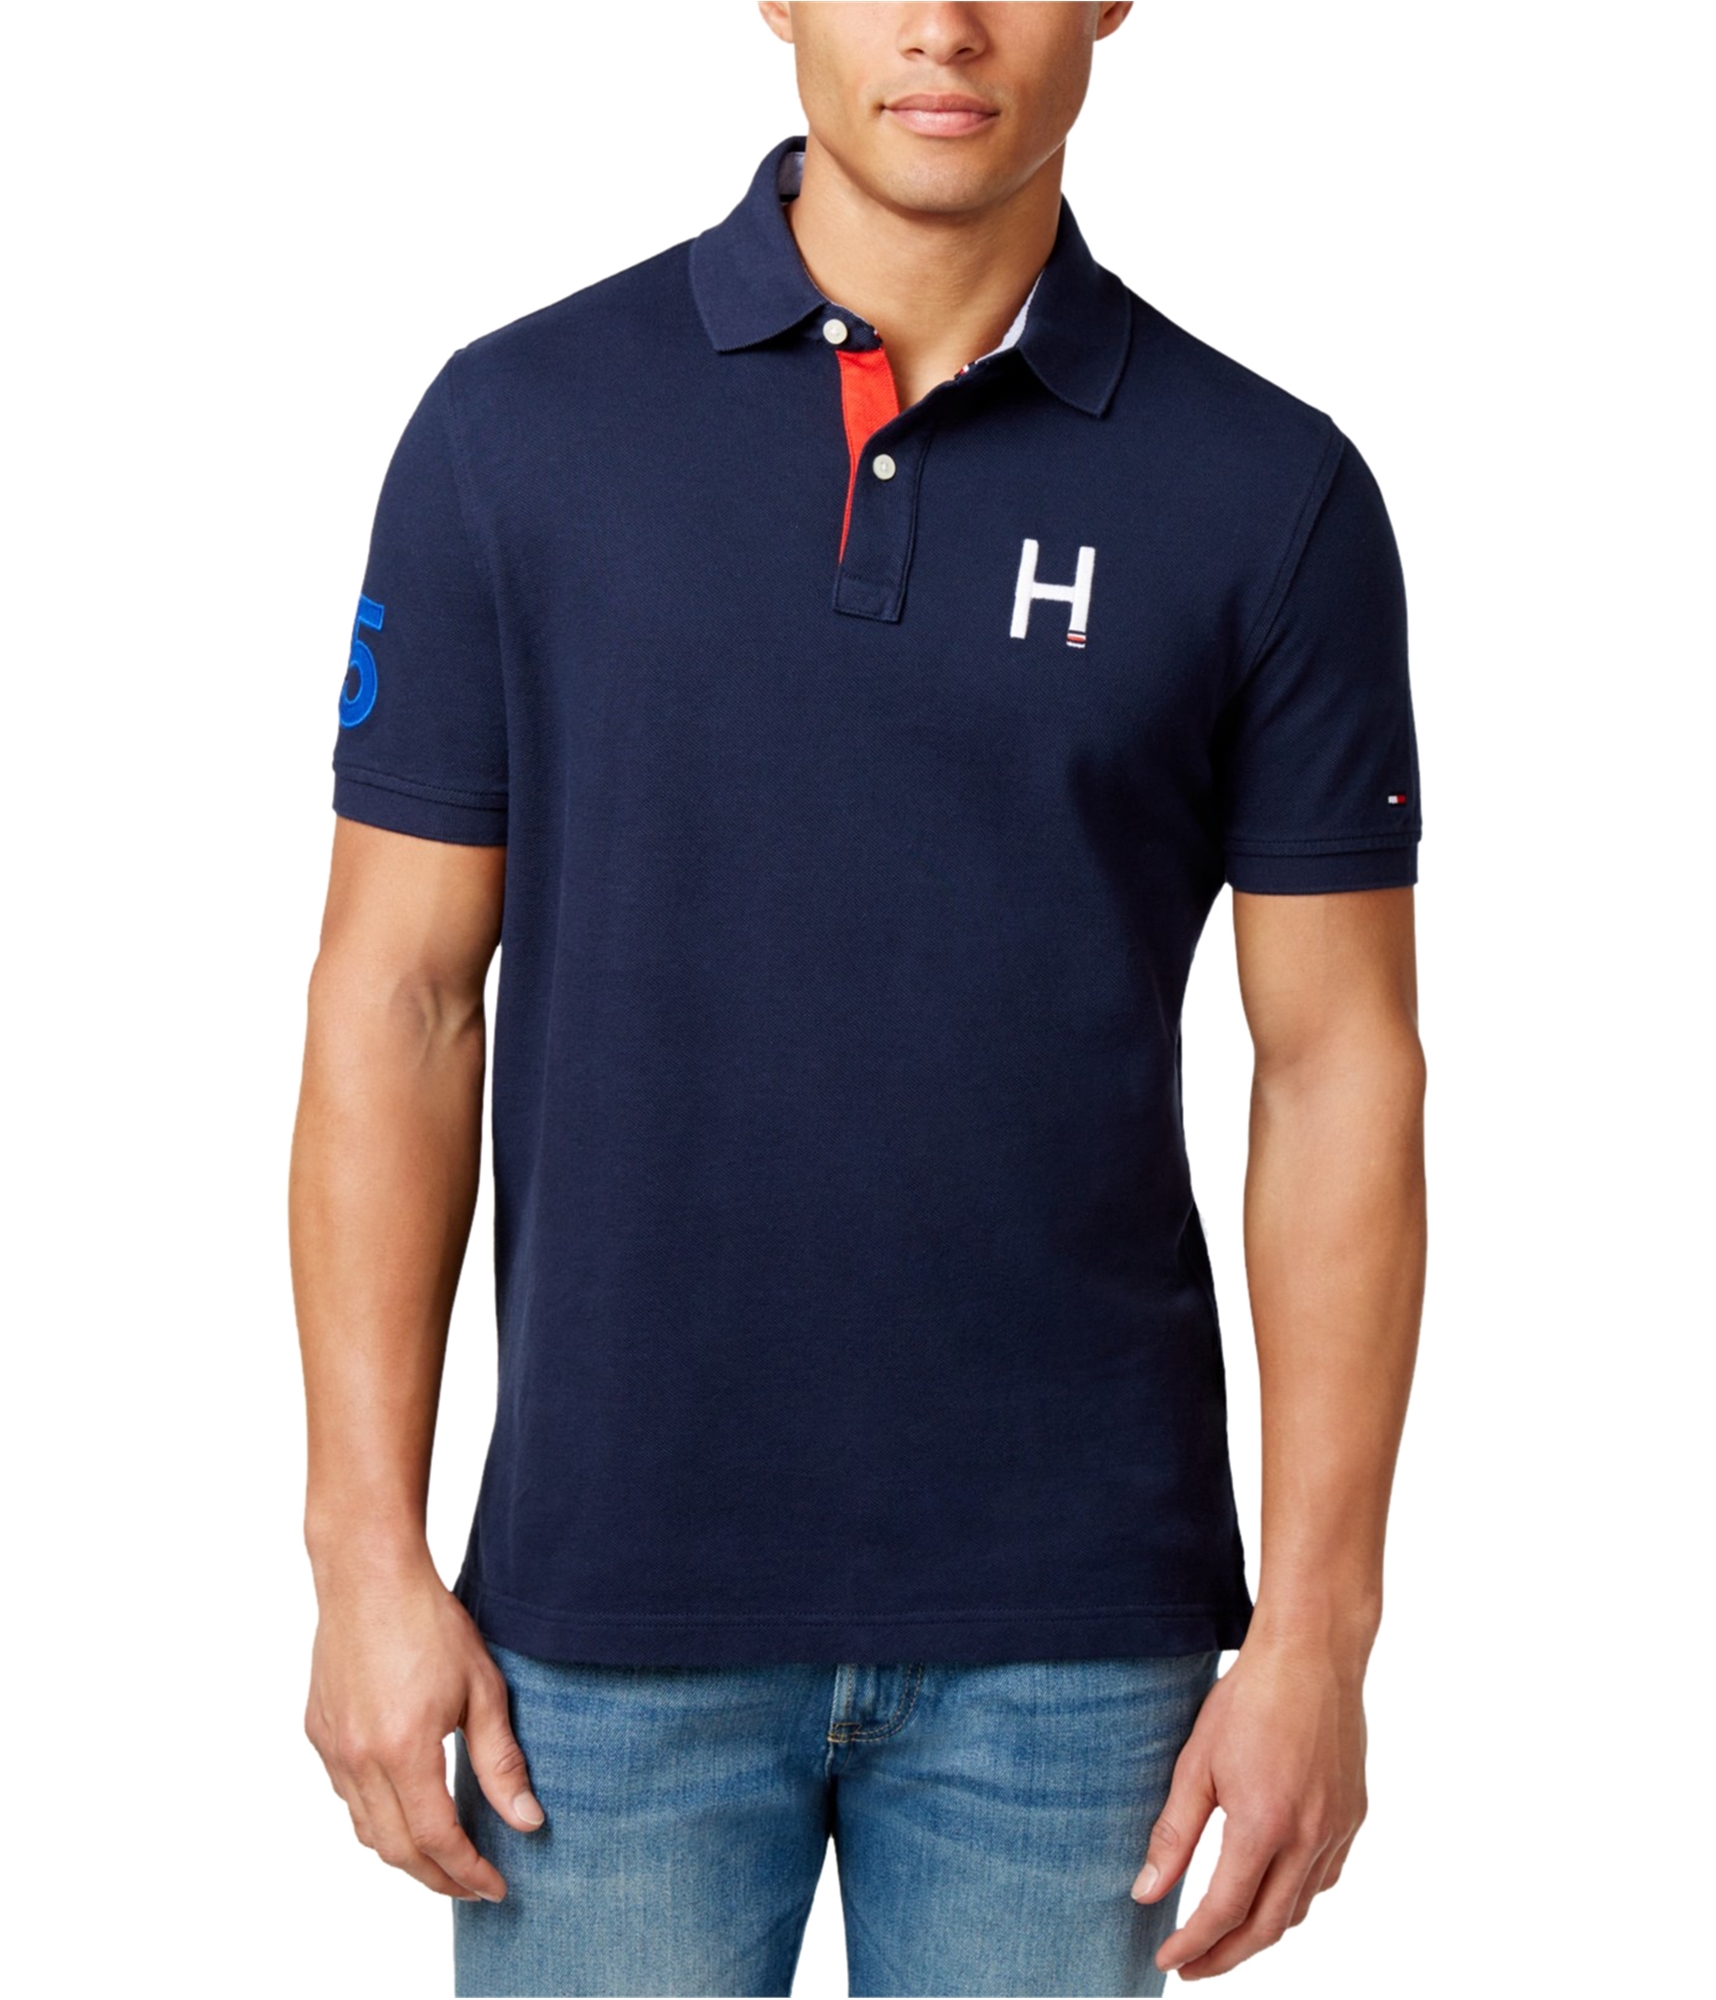 Buy a Mens Tommy Hilfiger Flanders Rugby Polo Shirt | TagsWeekly.com